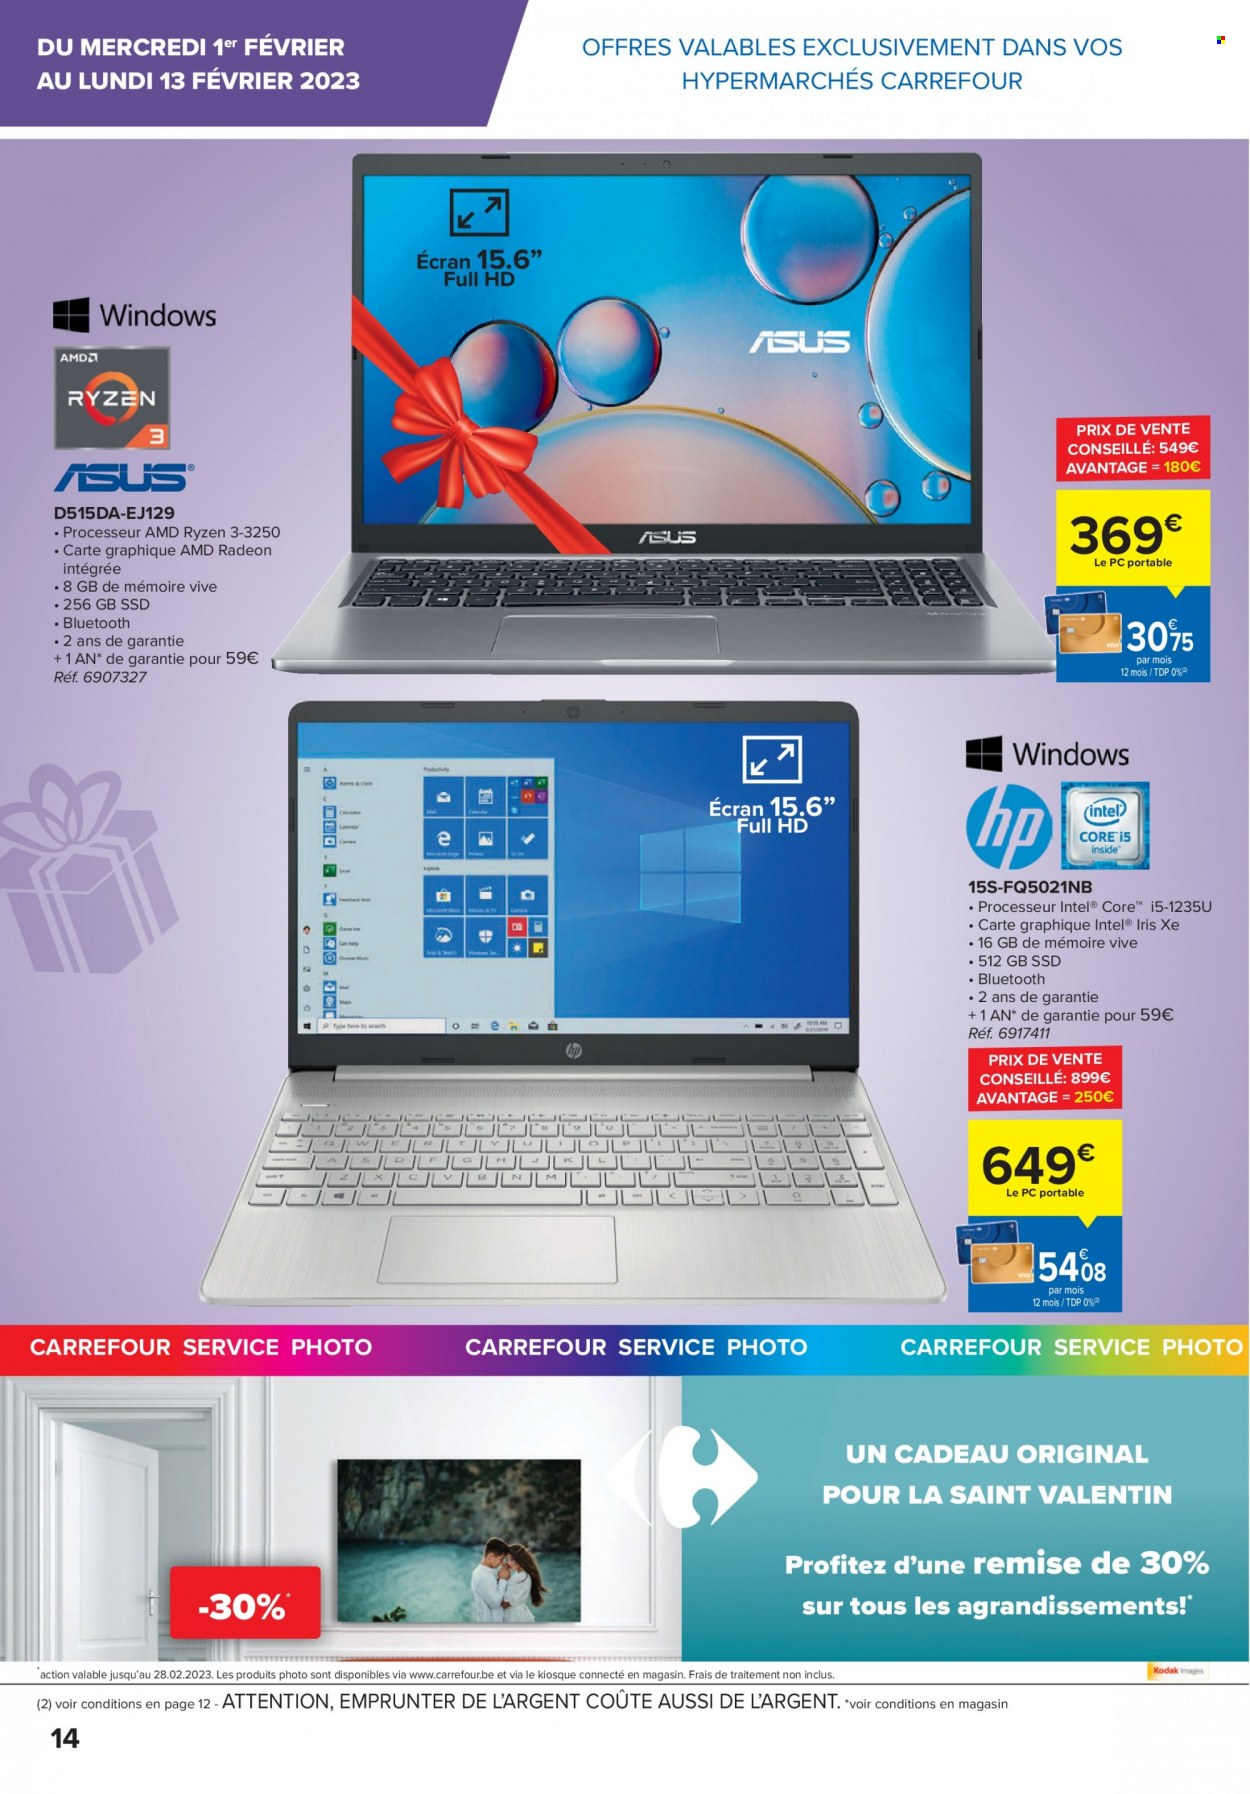 Catalogue Carrefour hypermarkt - 1.2.2023 - 13.2.2023. Page 14.